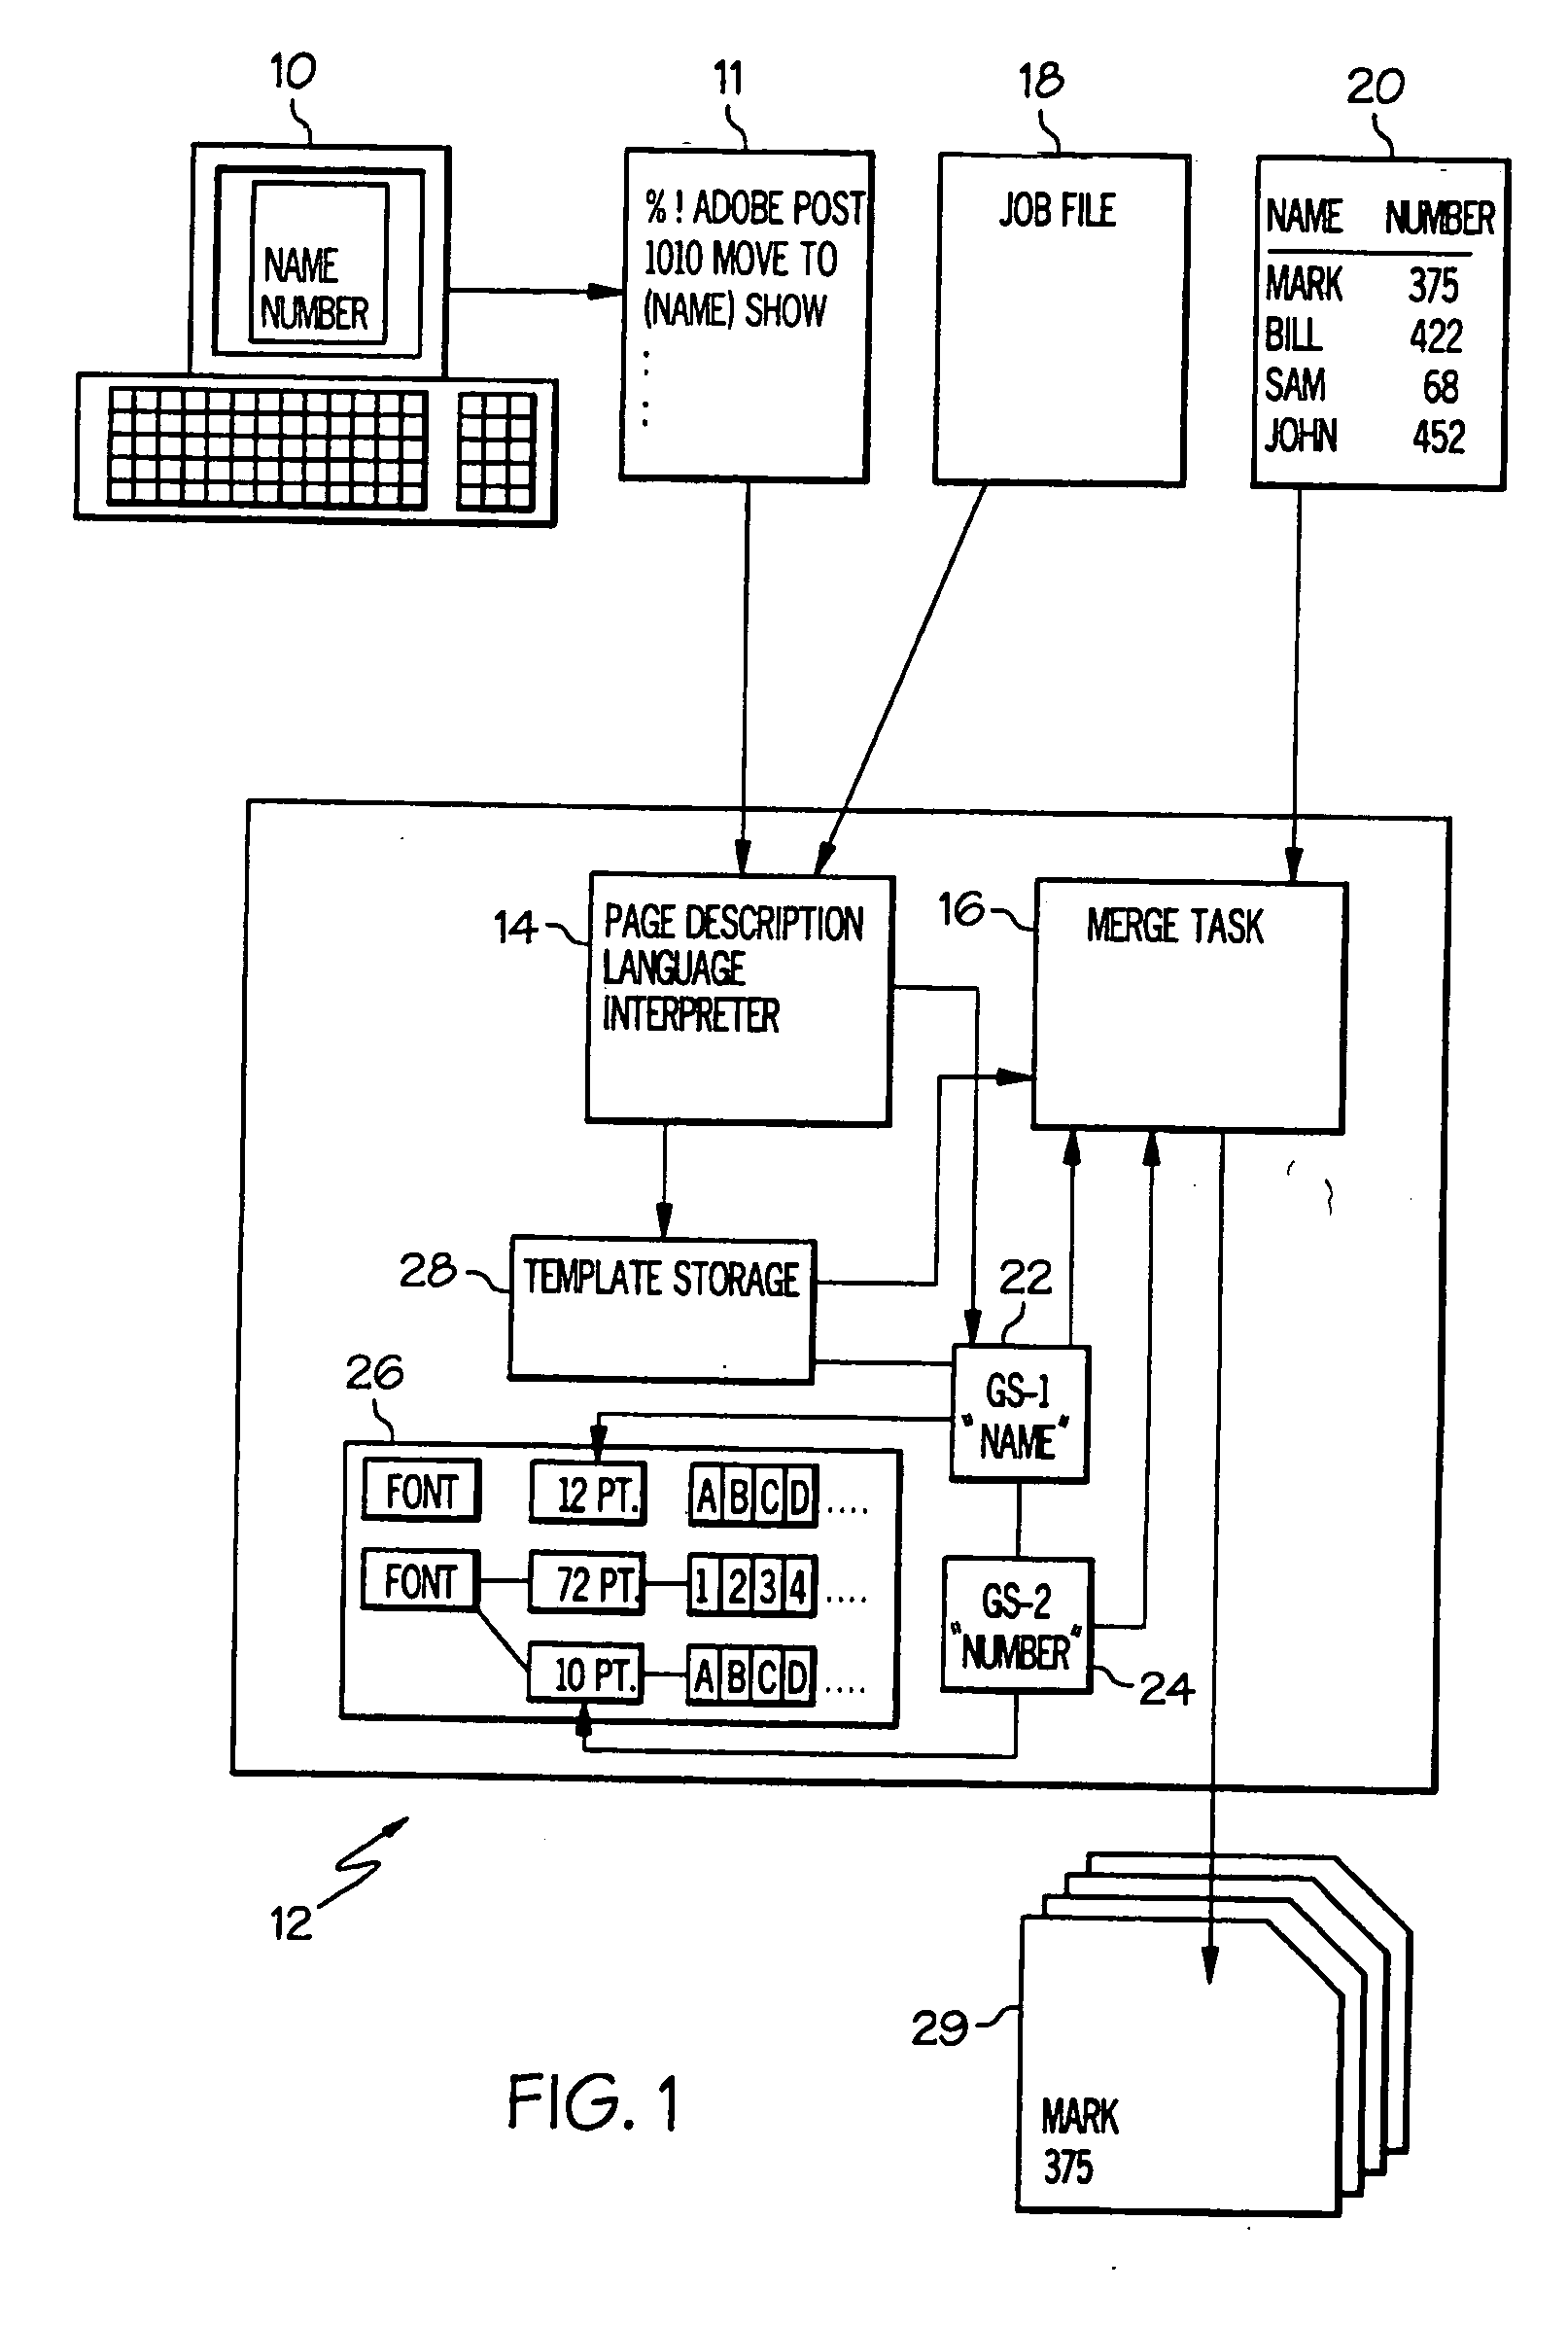 Method of utilizing variable data fields with a page description language